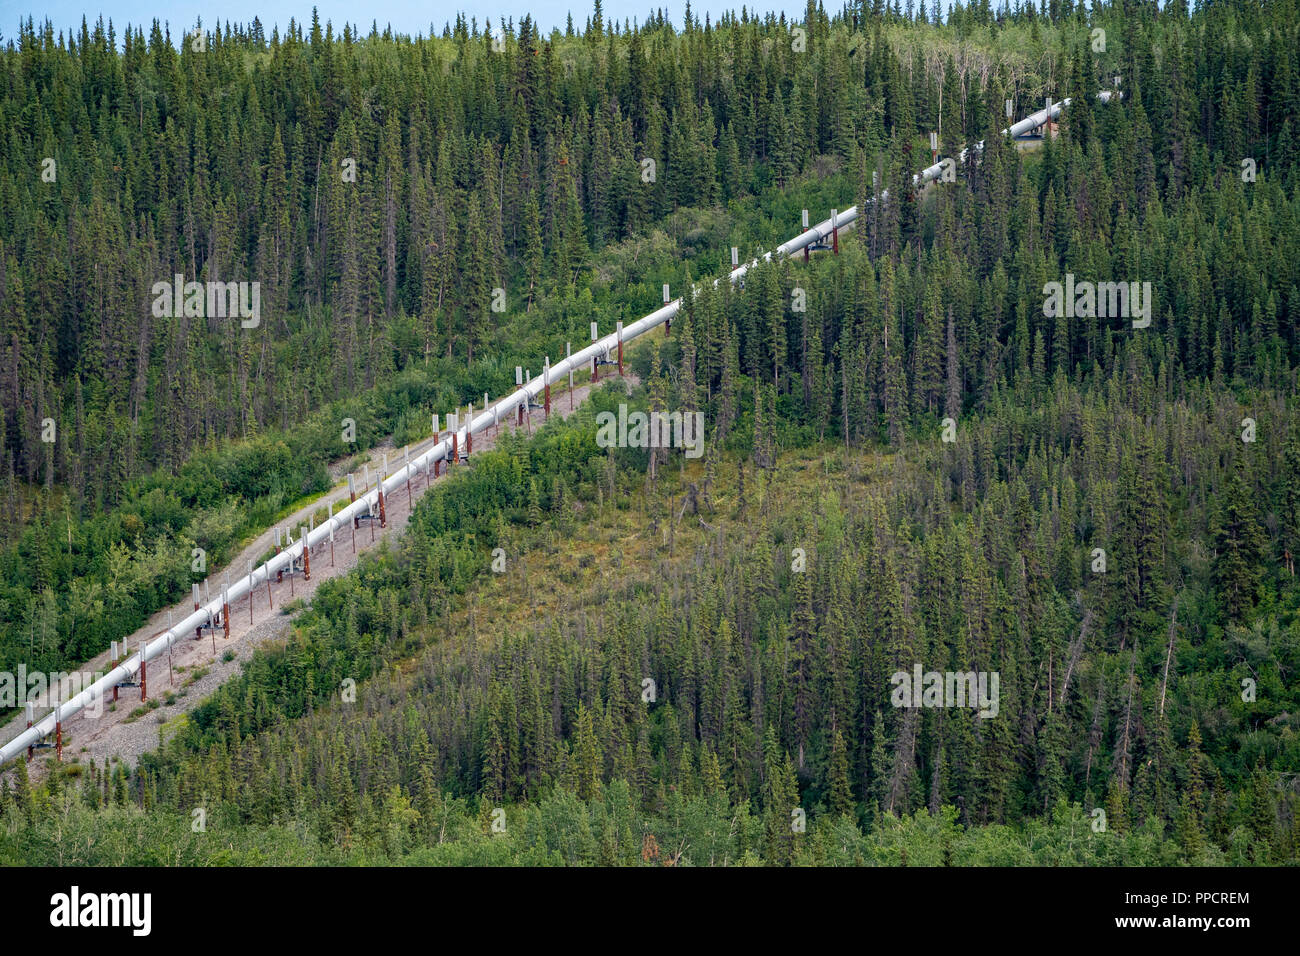 Aerial view of the Trans Alaska Pipeline (TAPS) from Copper River Alaska Stock Photo